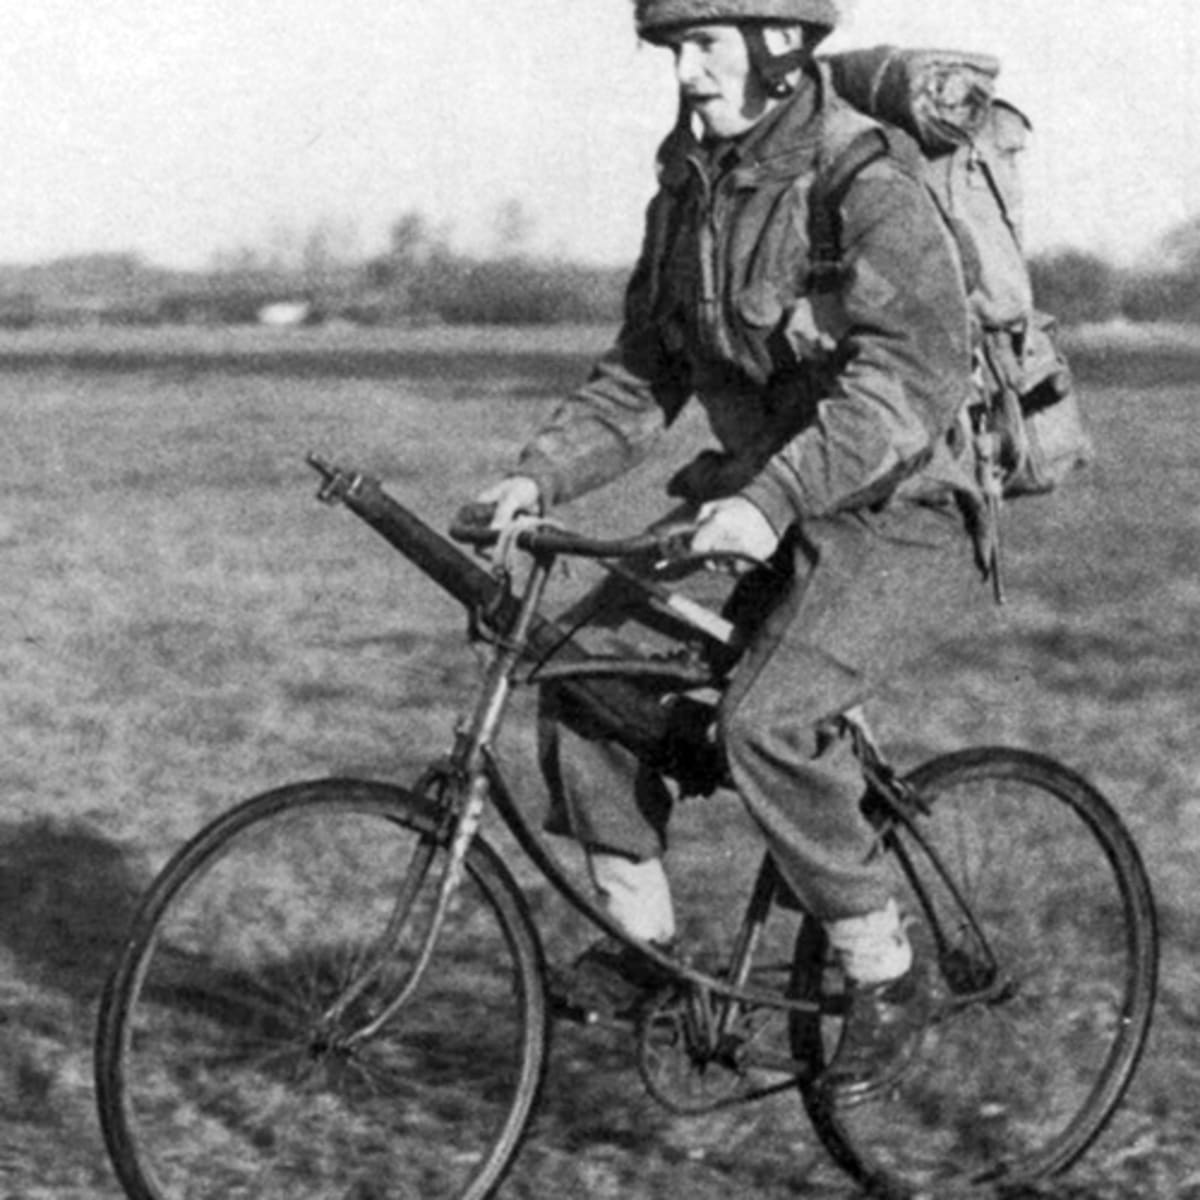 ww2 bsa bicycle for sale